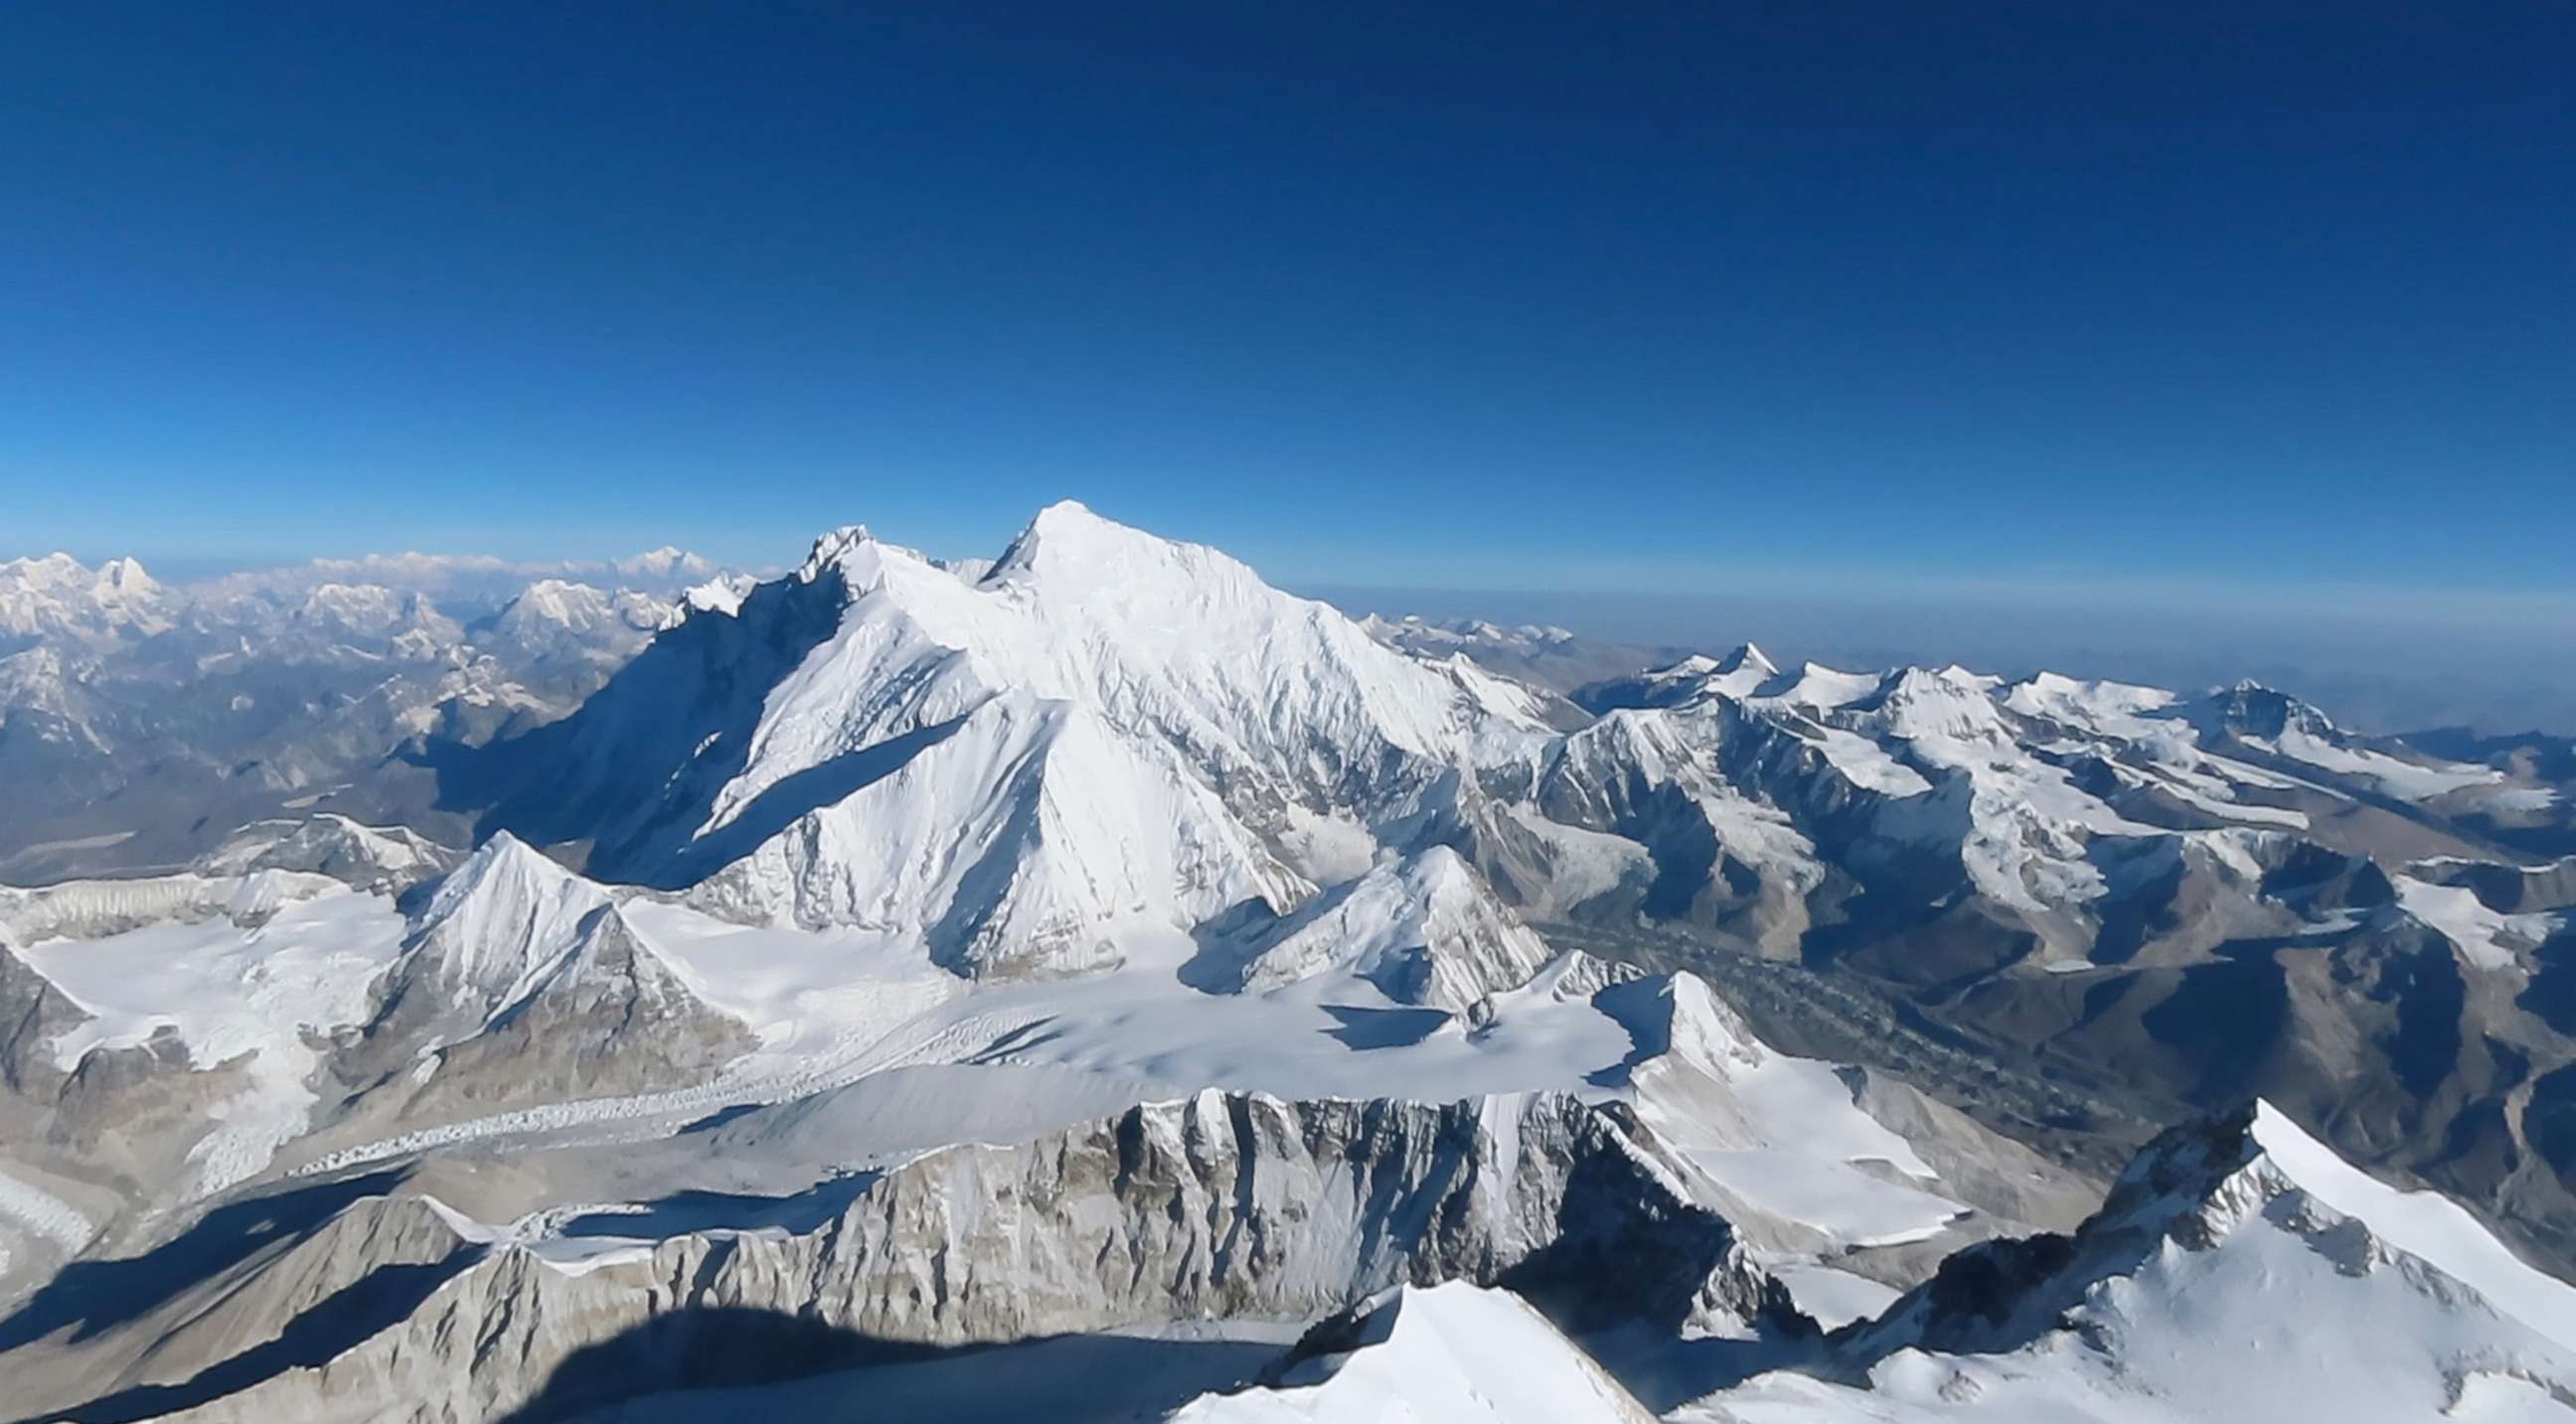 PHOTO: The view from Makalu of Lhotse. Nims Purja broke the world record by climbing to the summit of Lhotse from Everest, and then scaling Makalu in 48 hours and 30 minutes.